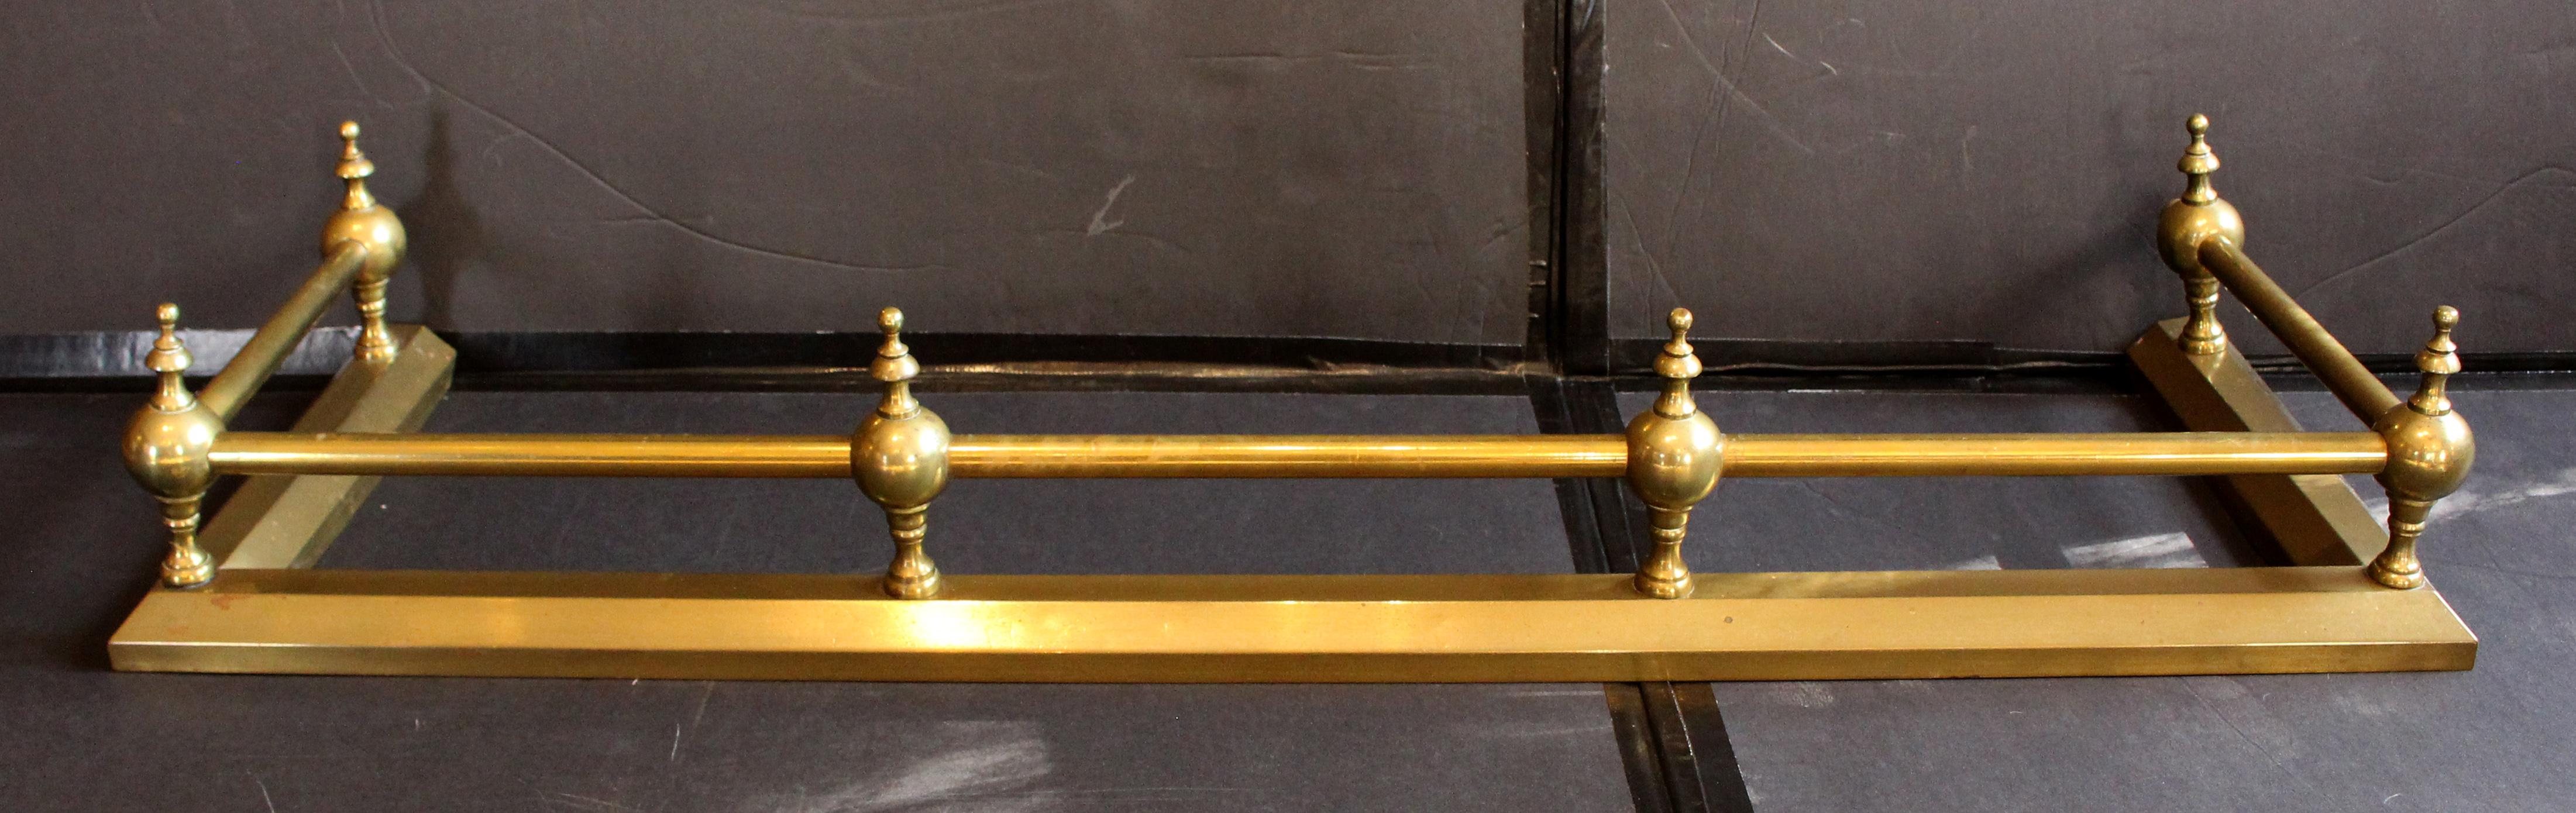 19th Century c. 1860 English Brass Fireplace Fender For Sale